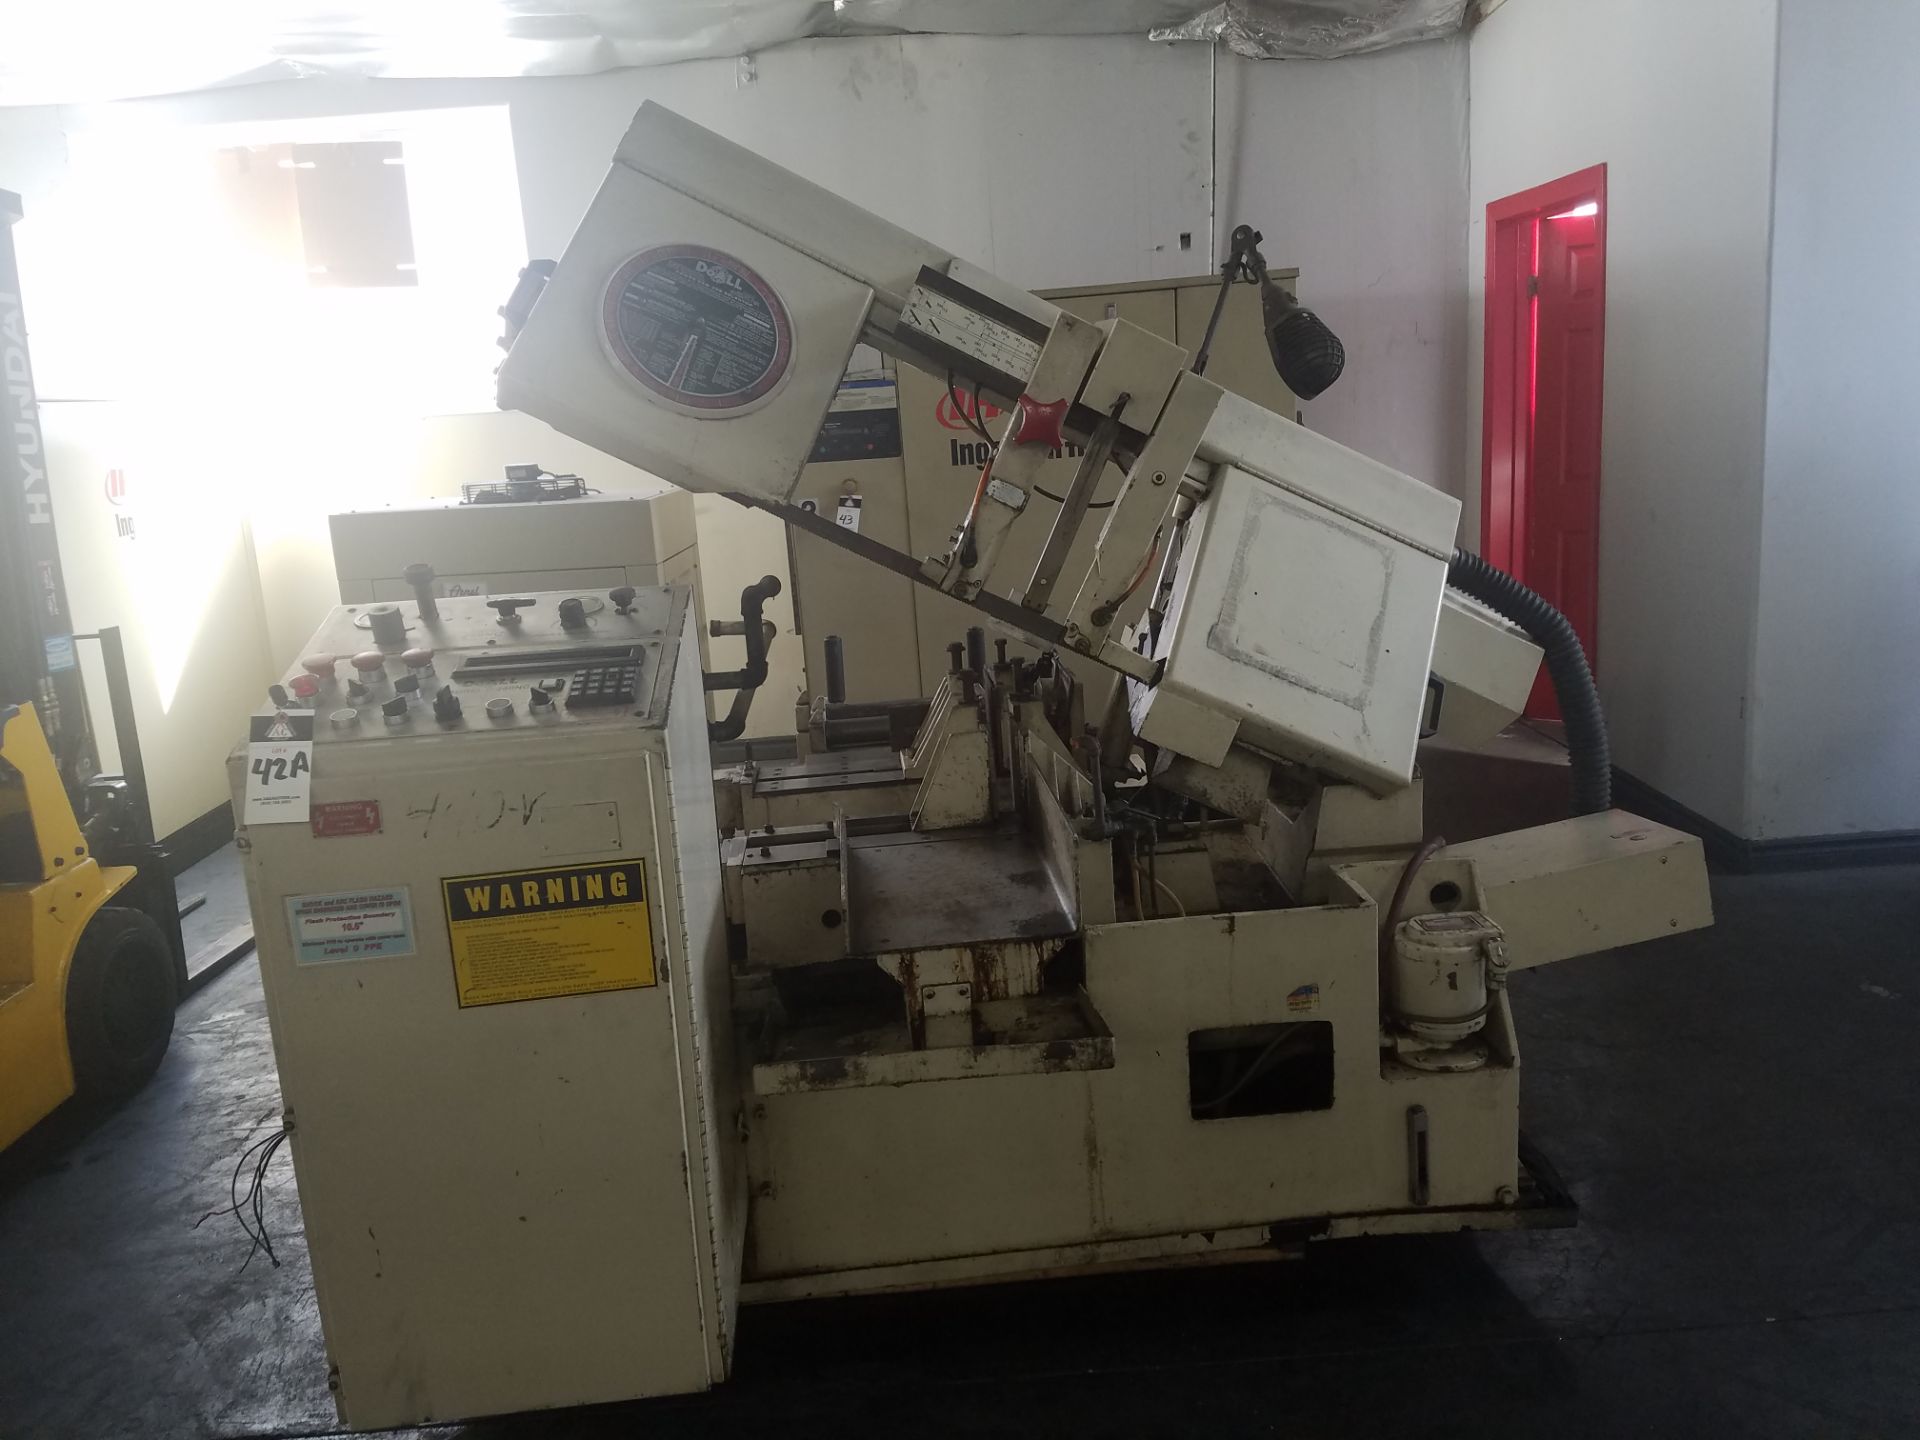 DoAll Horizontal Automatic Power Band Saw Mod. C-260NC Hydraulic, 138" Band Length Chip Auger.